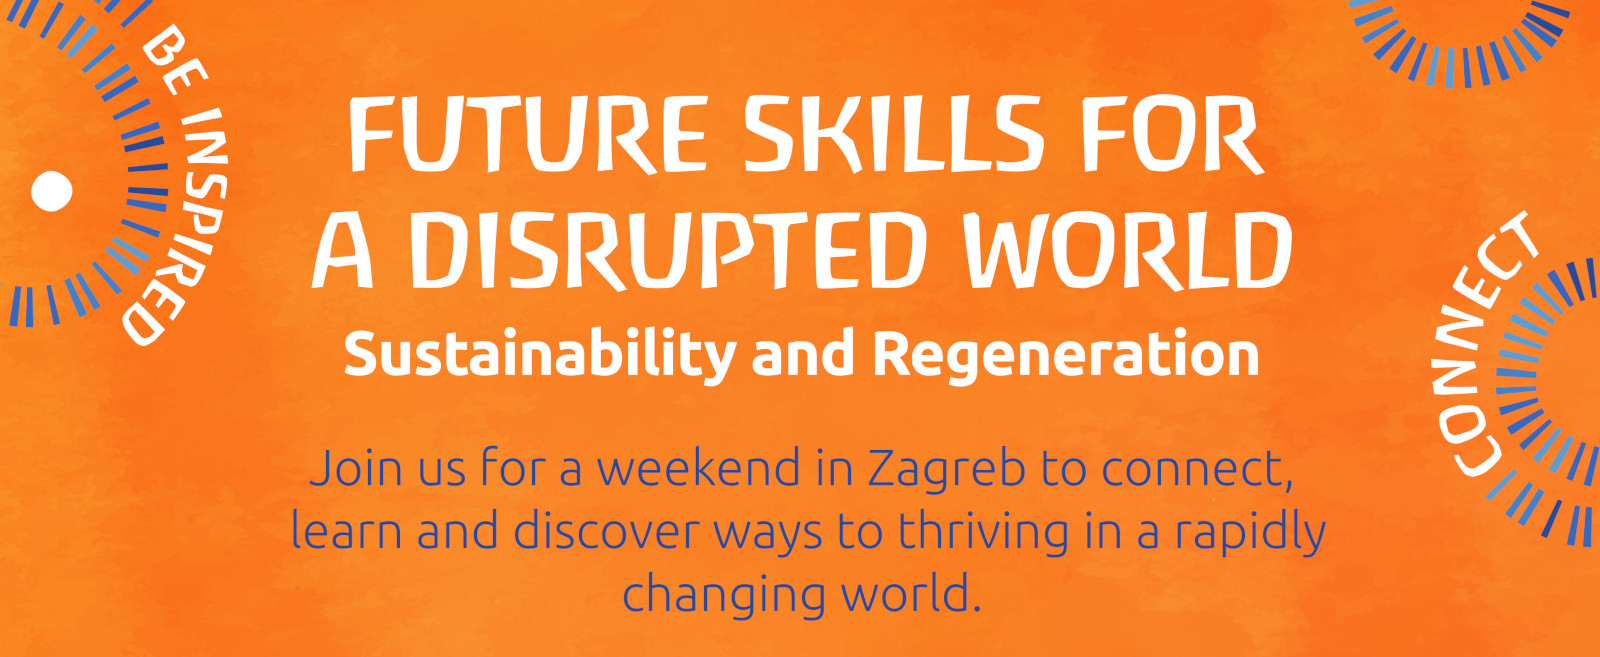 Future Skills for a Disrupted World: Sustainability and Regeneration